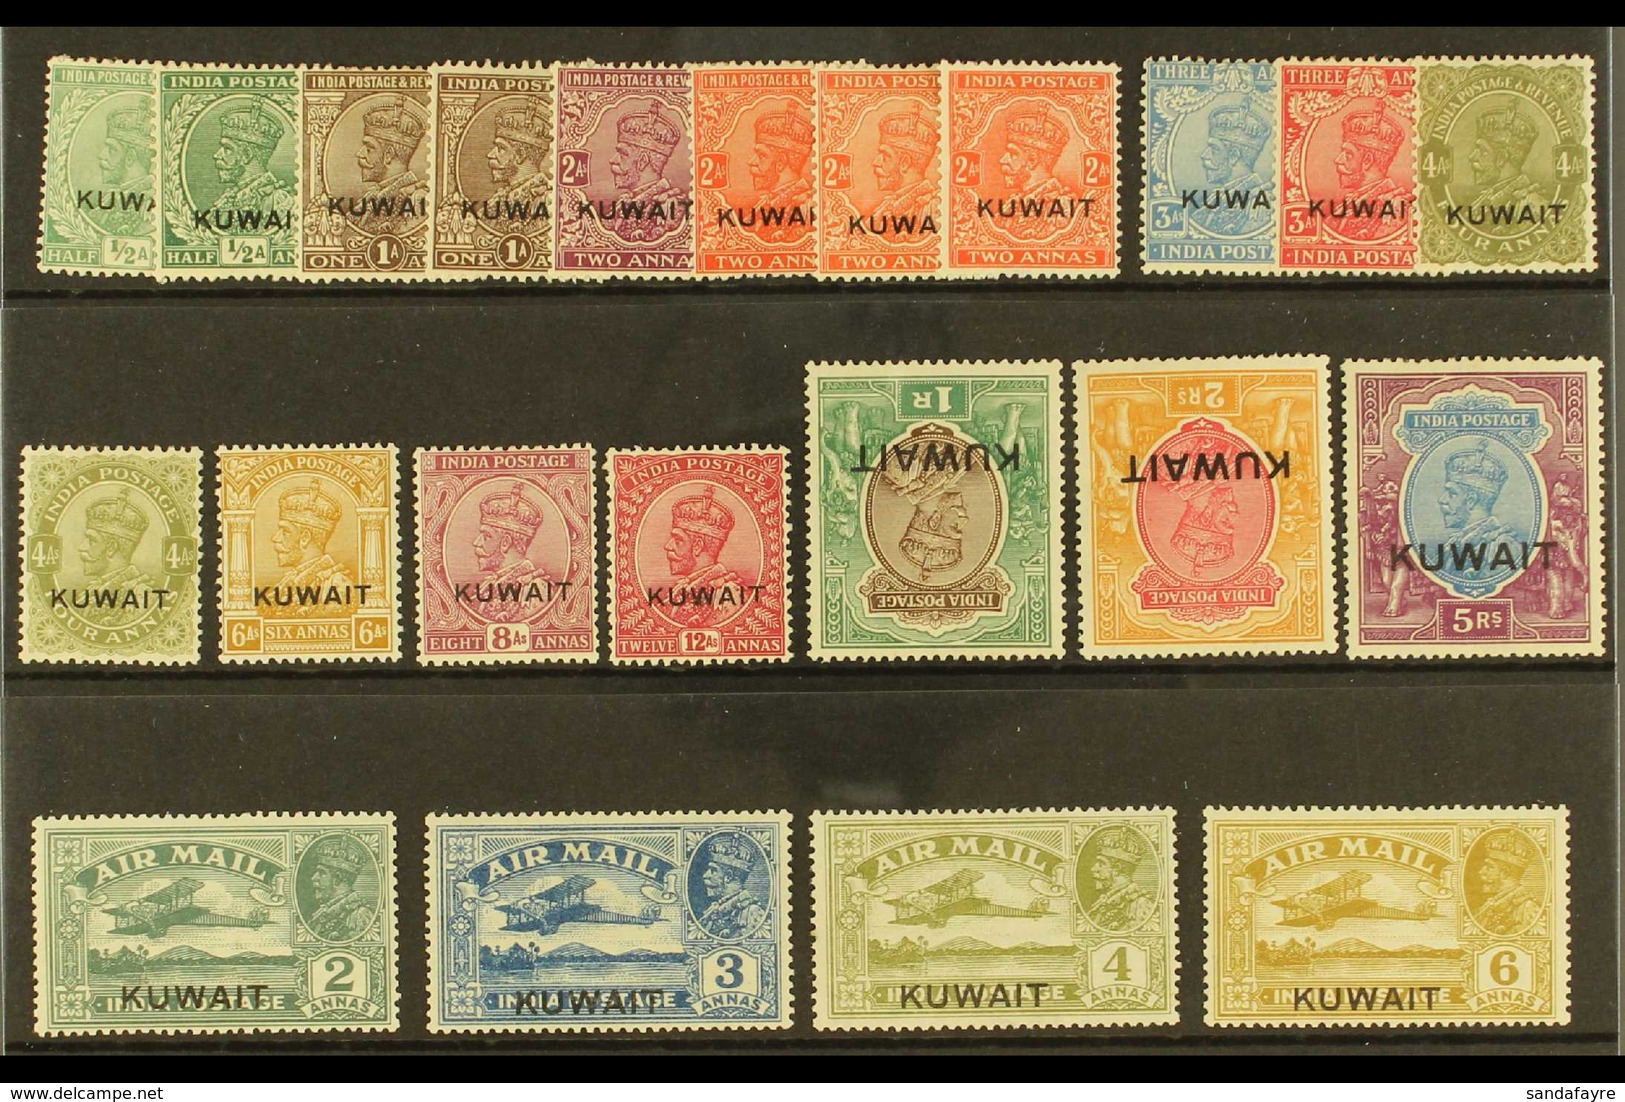 1929-34 KGV MINT SELECTION Presented On A Stock Card. Includes 1929-37 Set To 5r With ½a Shade, 1a Types, 2a Die & Types - Kuwait